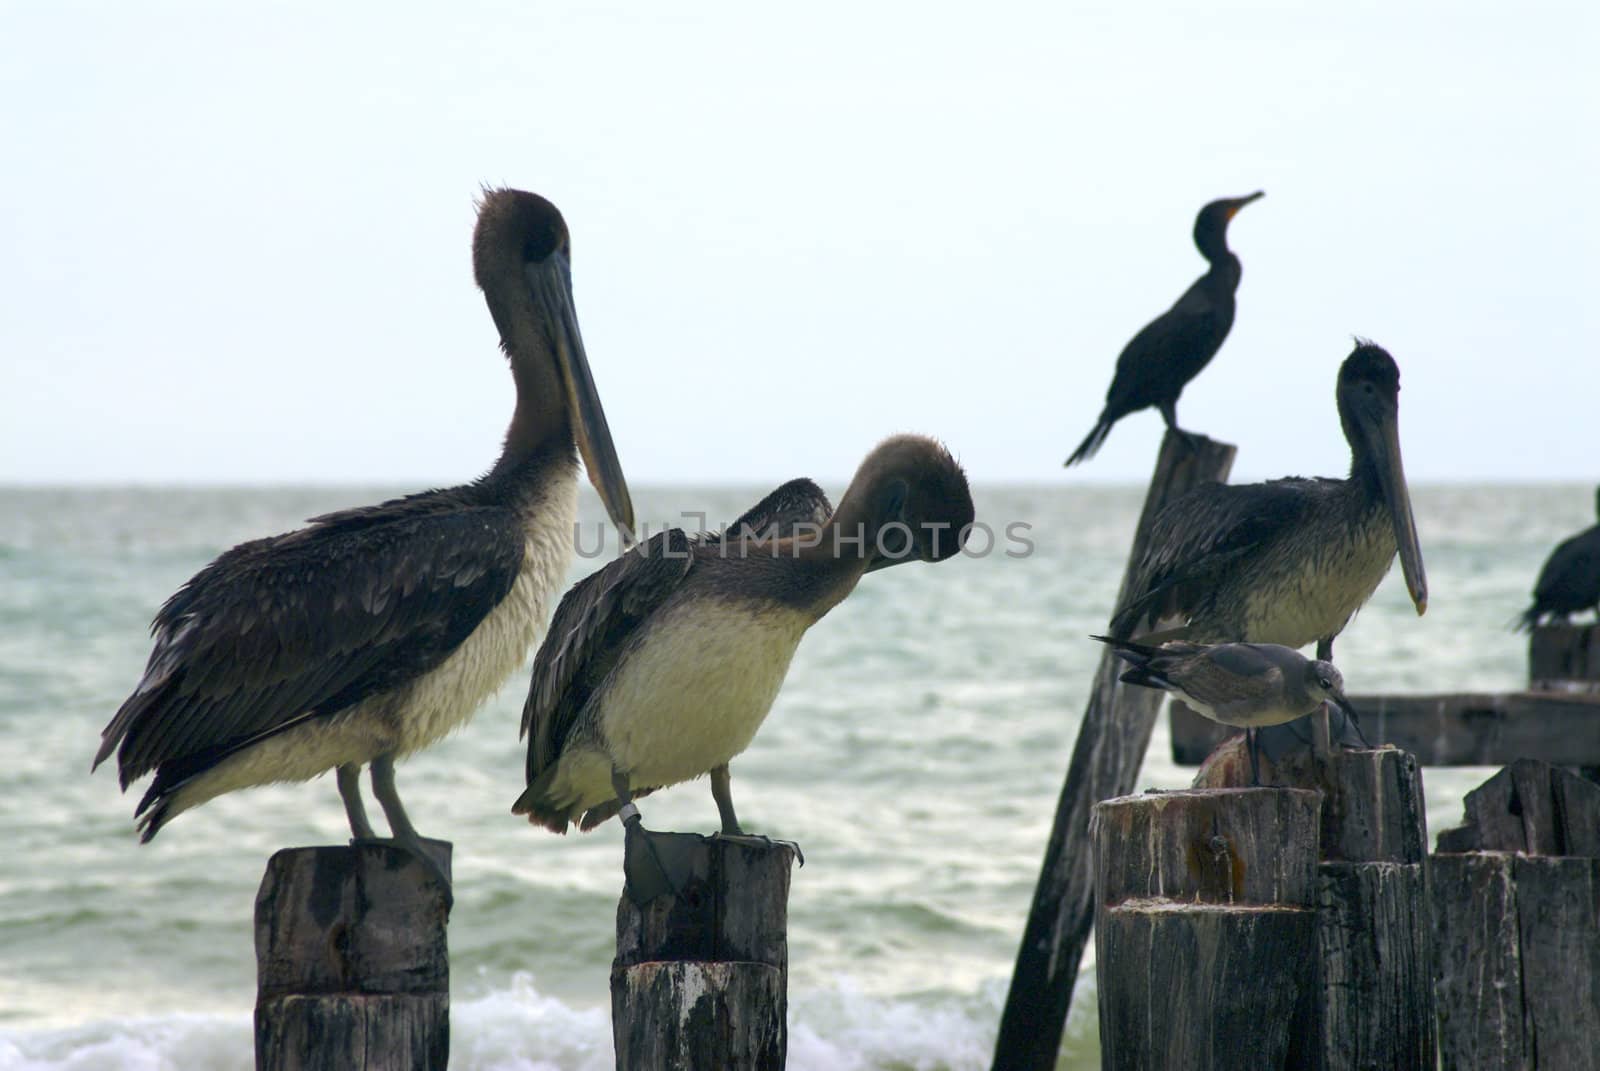 Pelicans on Pilings by npologuy